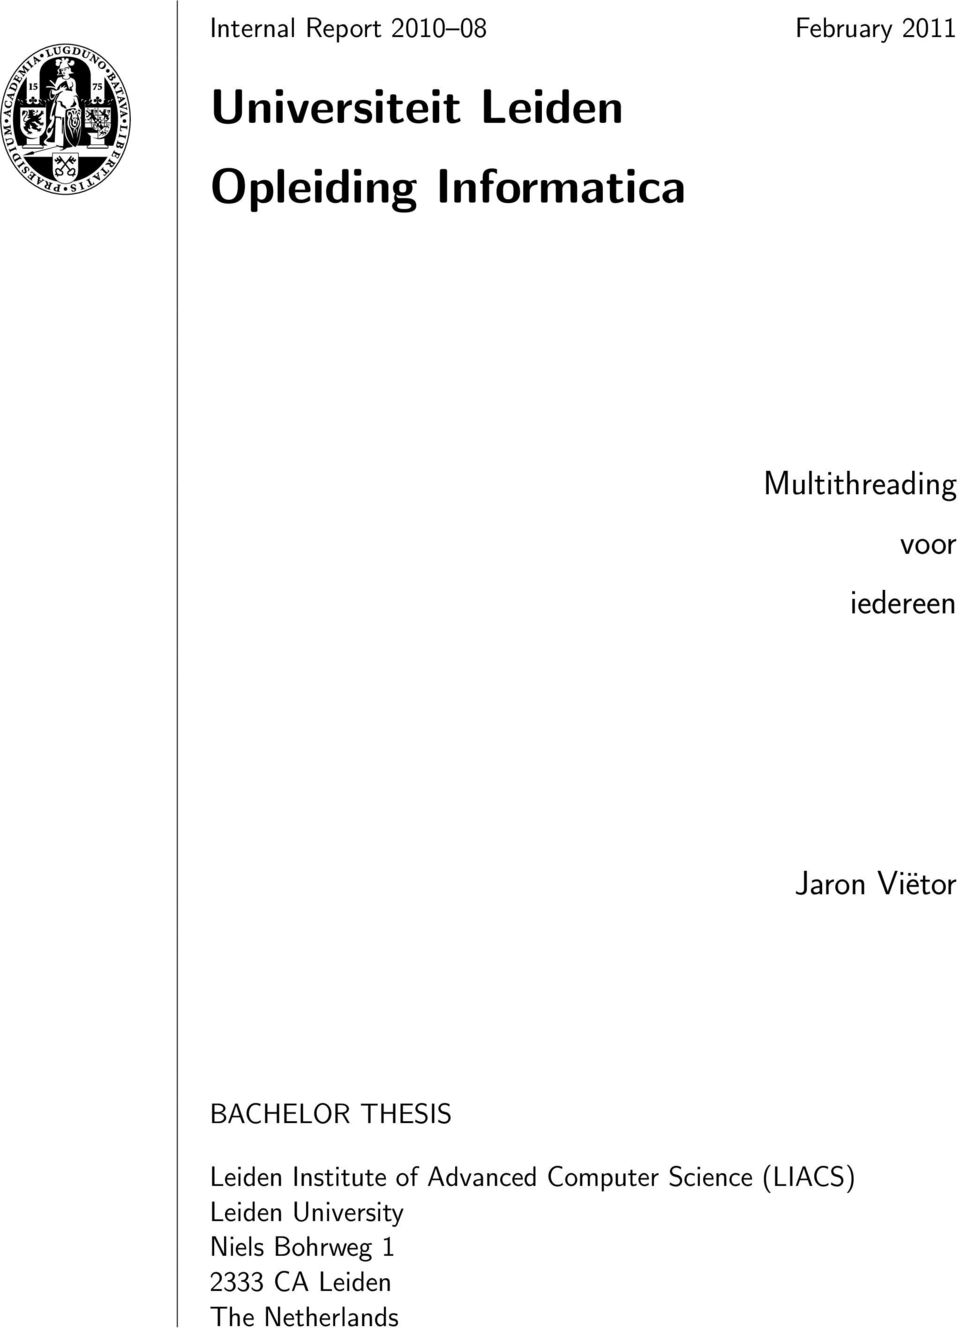 BACHELOR THESIS Leiden Institute of Advanced Computer Science